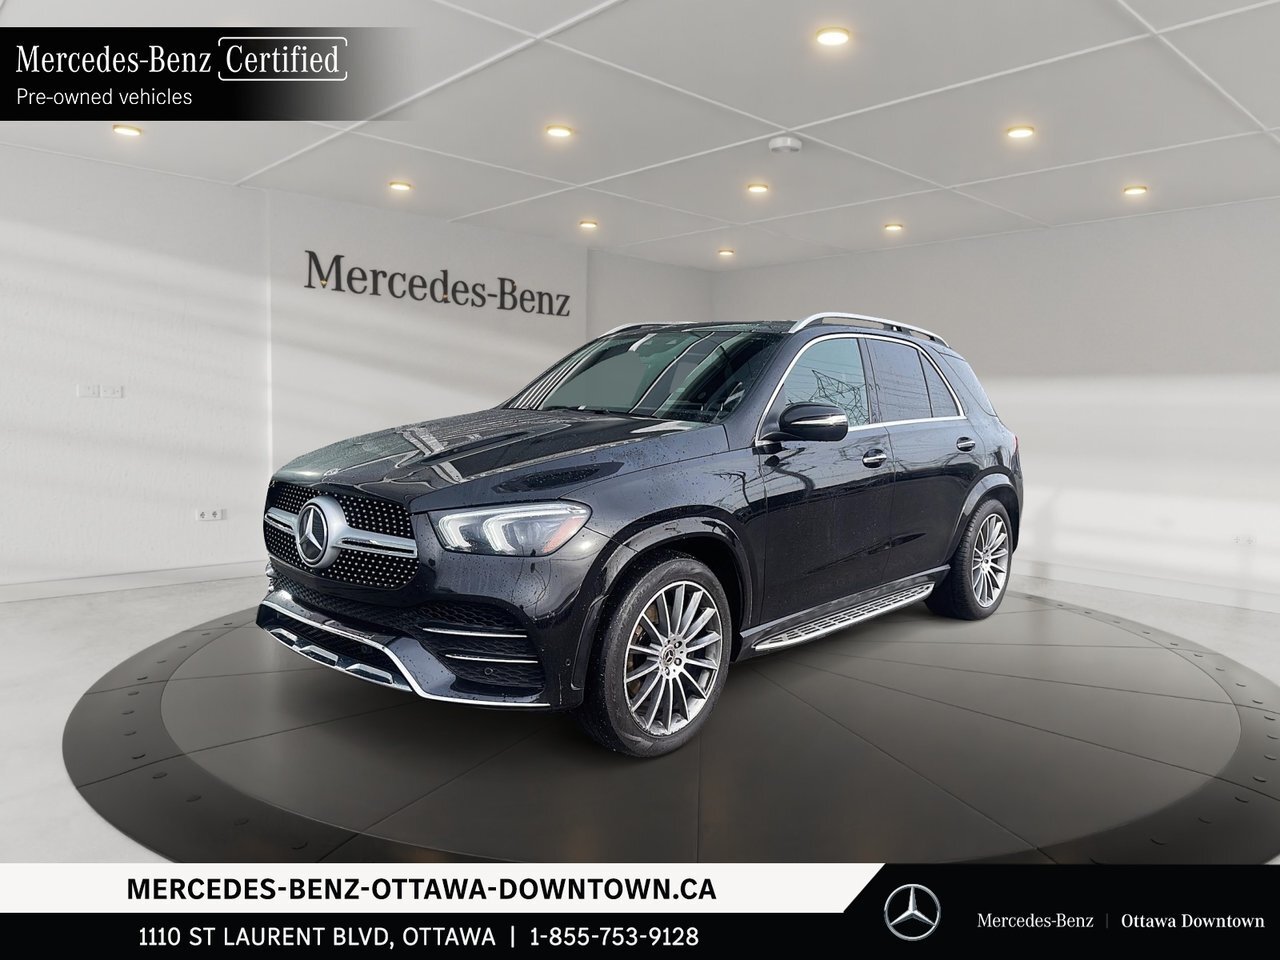 2021 Mercedes-Benz GLE450 4MATIC SUV- One Owner Clean Accident free well equ